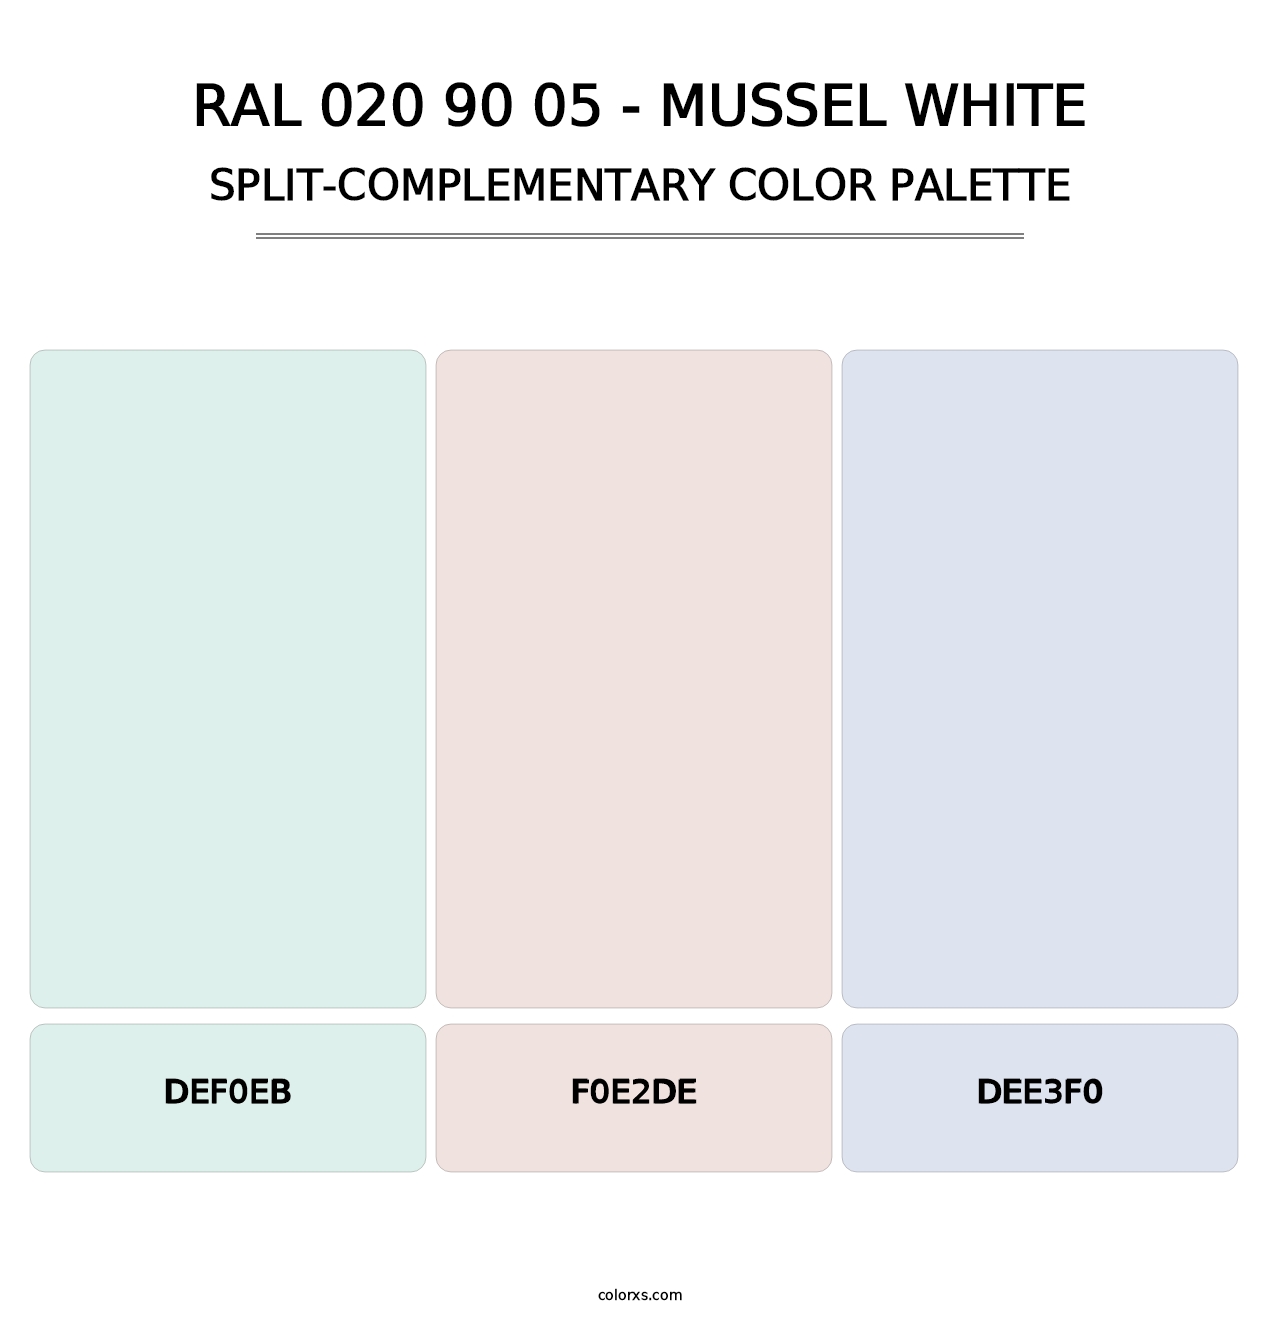 RAL 020 90 05 - Mussel White - Split-Complementary Color Palette